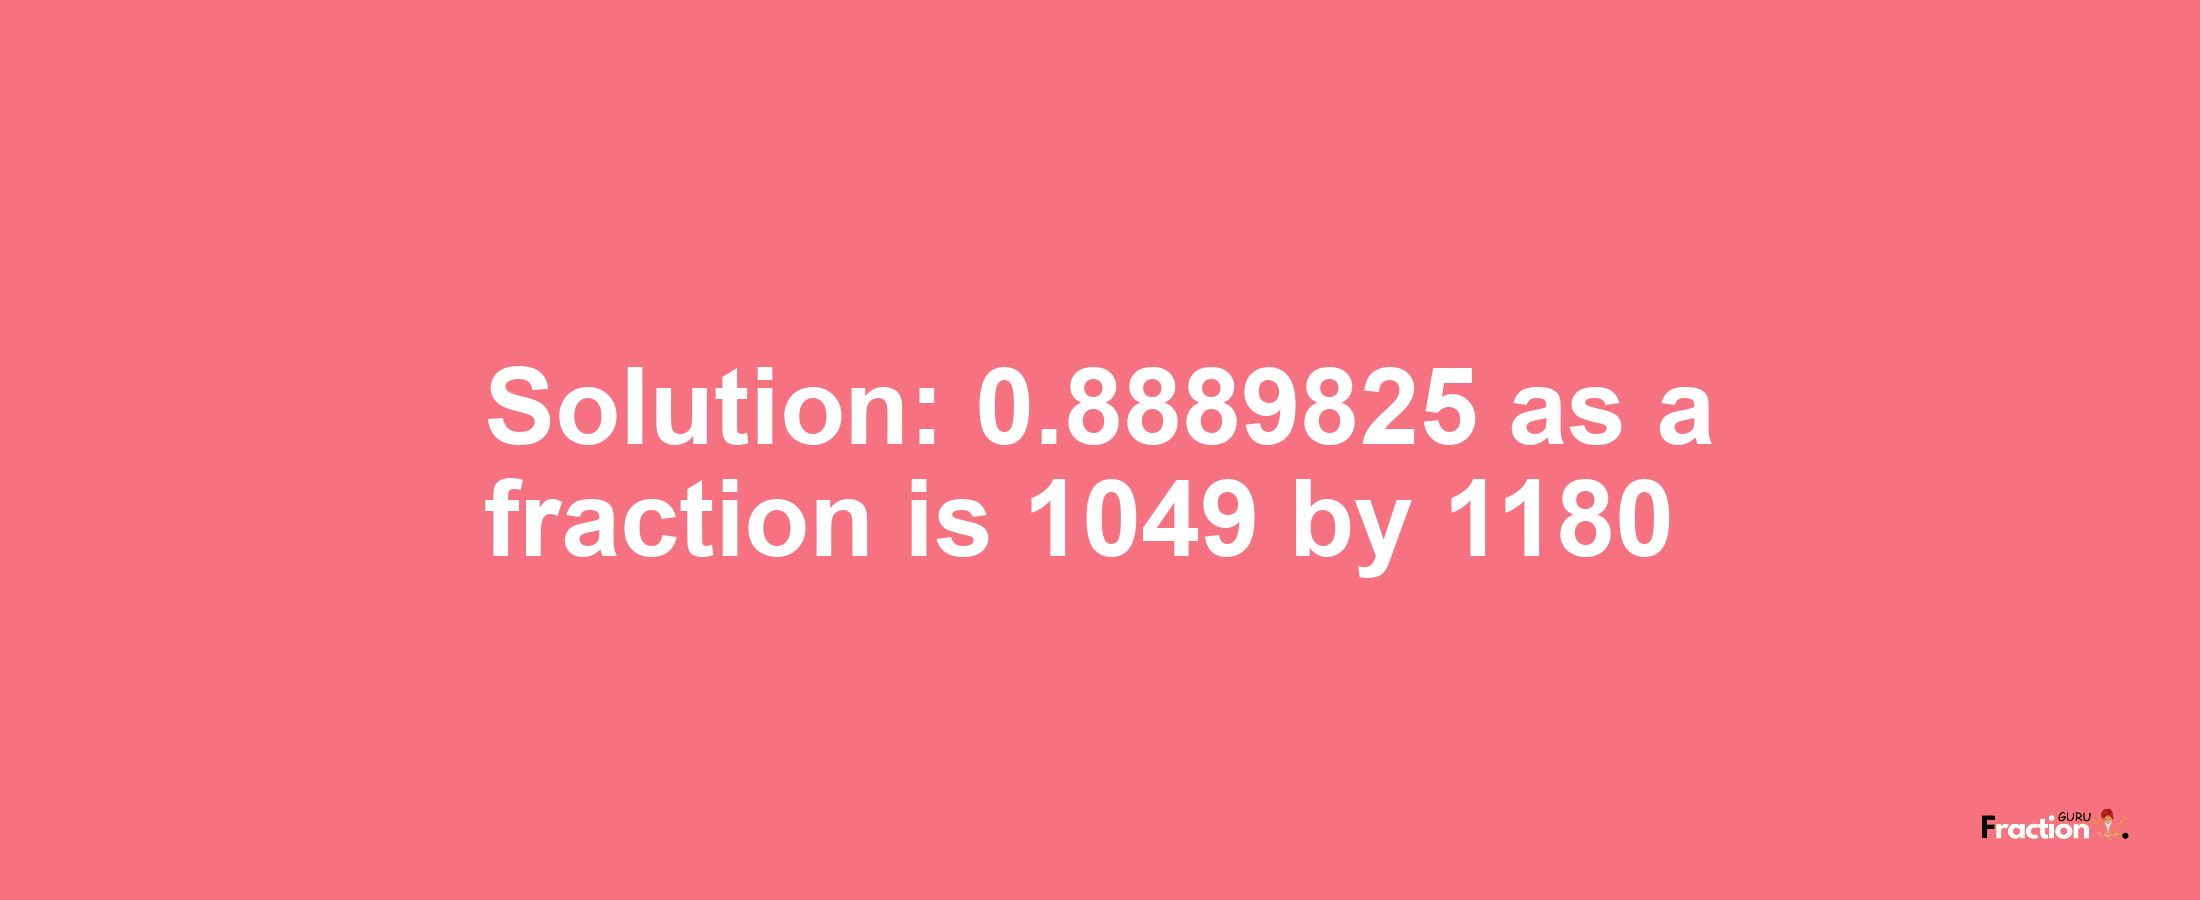 Solution:0.8889825 as a fraction is 1049/1180